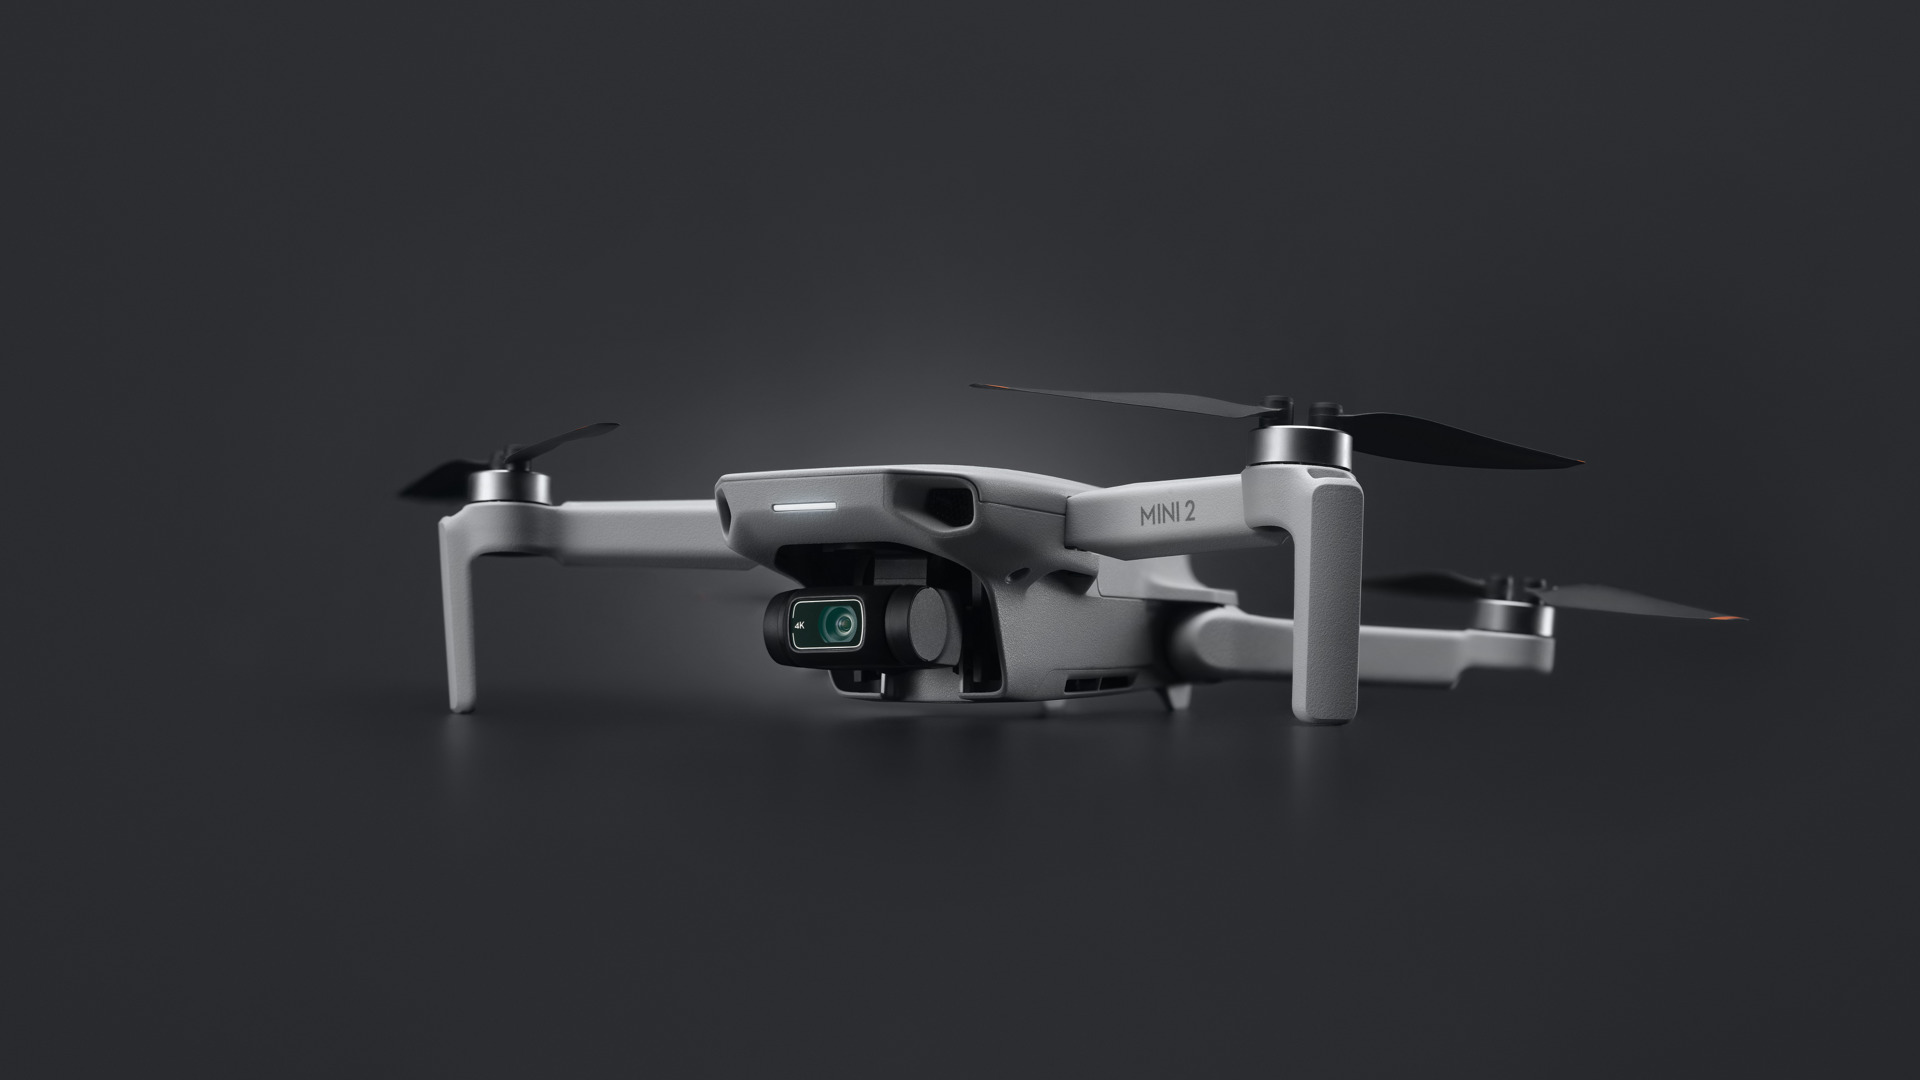 Dji innovations investing environmentally conscious investing in mutual funds